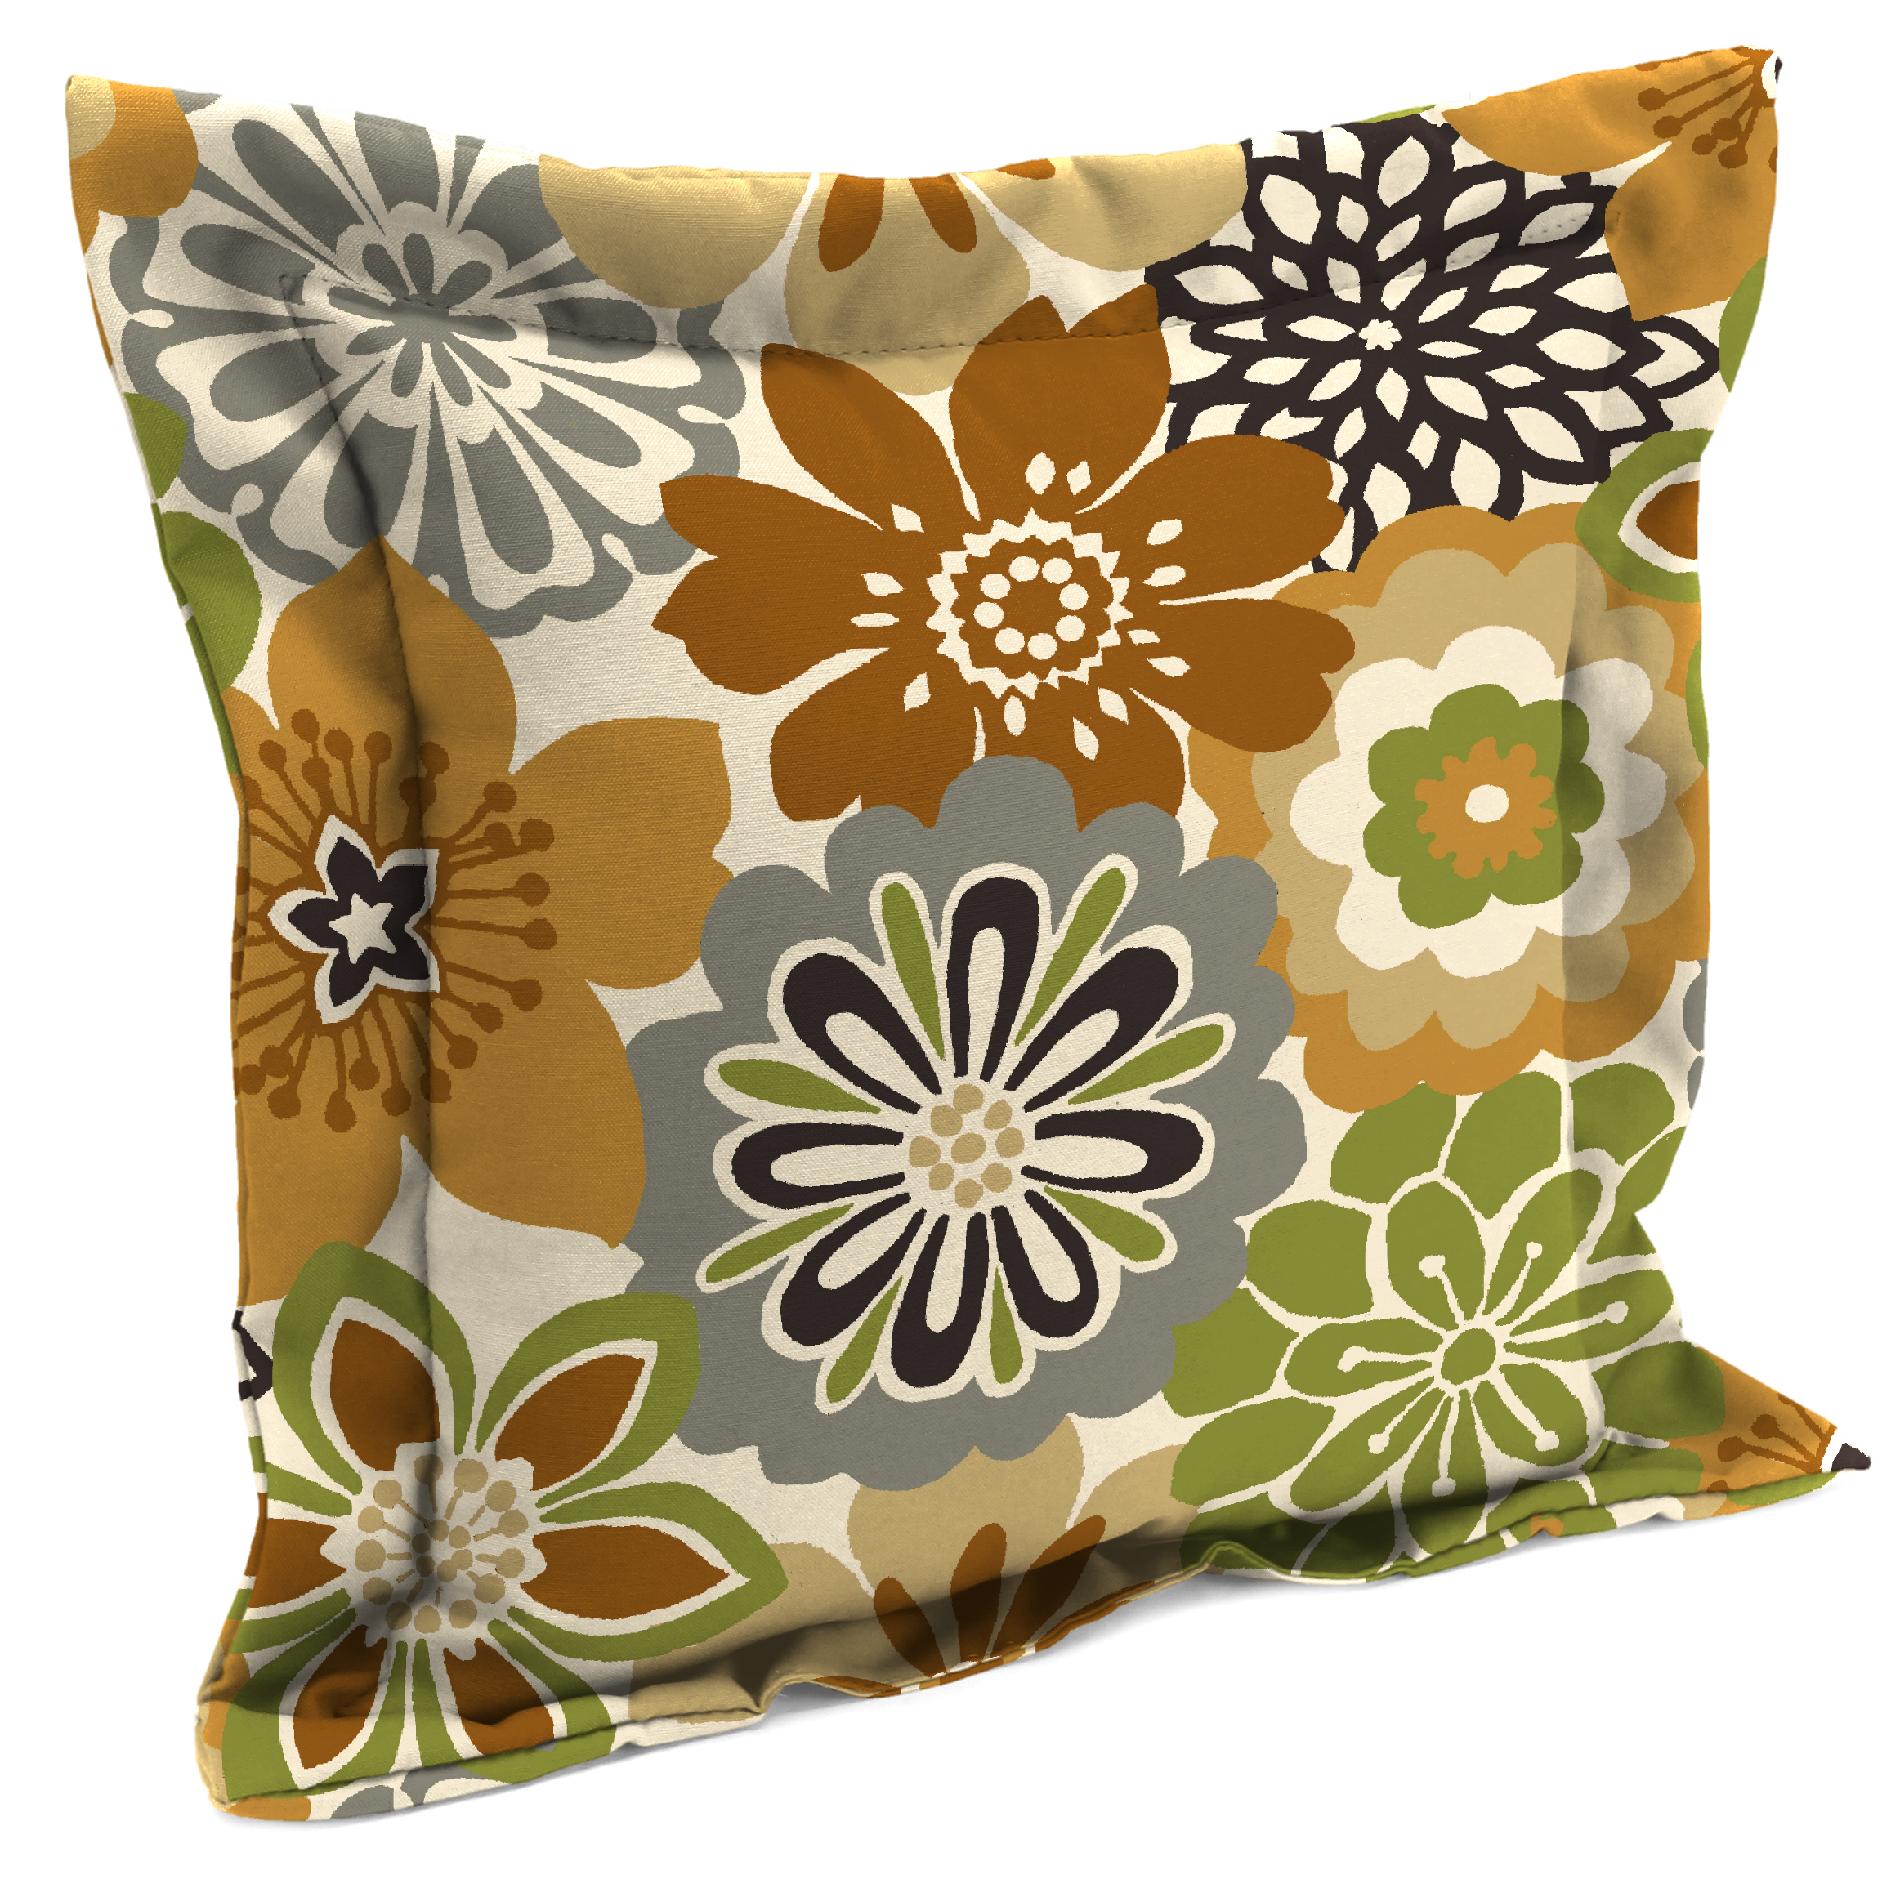 18" Flange Toss Pillow Cushion in Camilla Maple